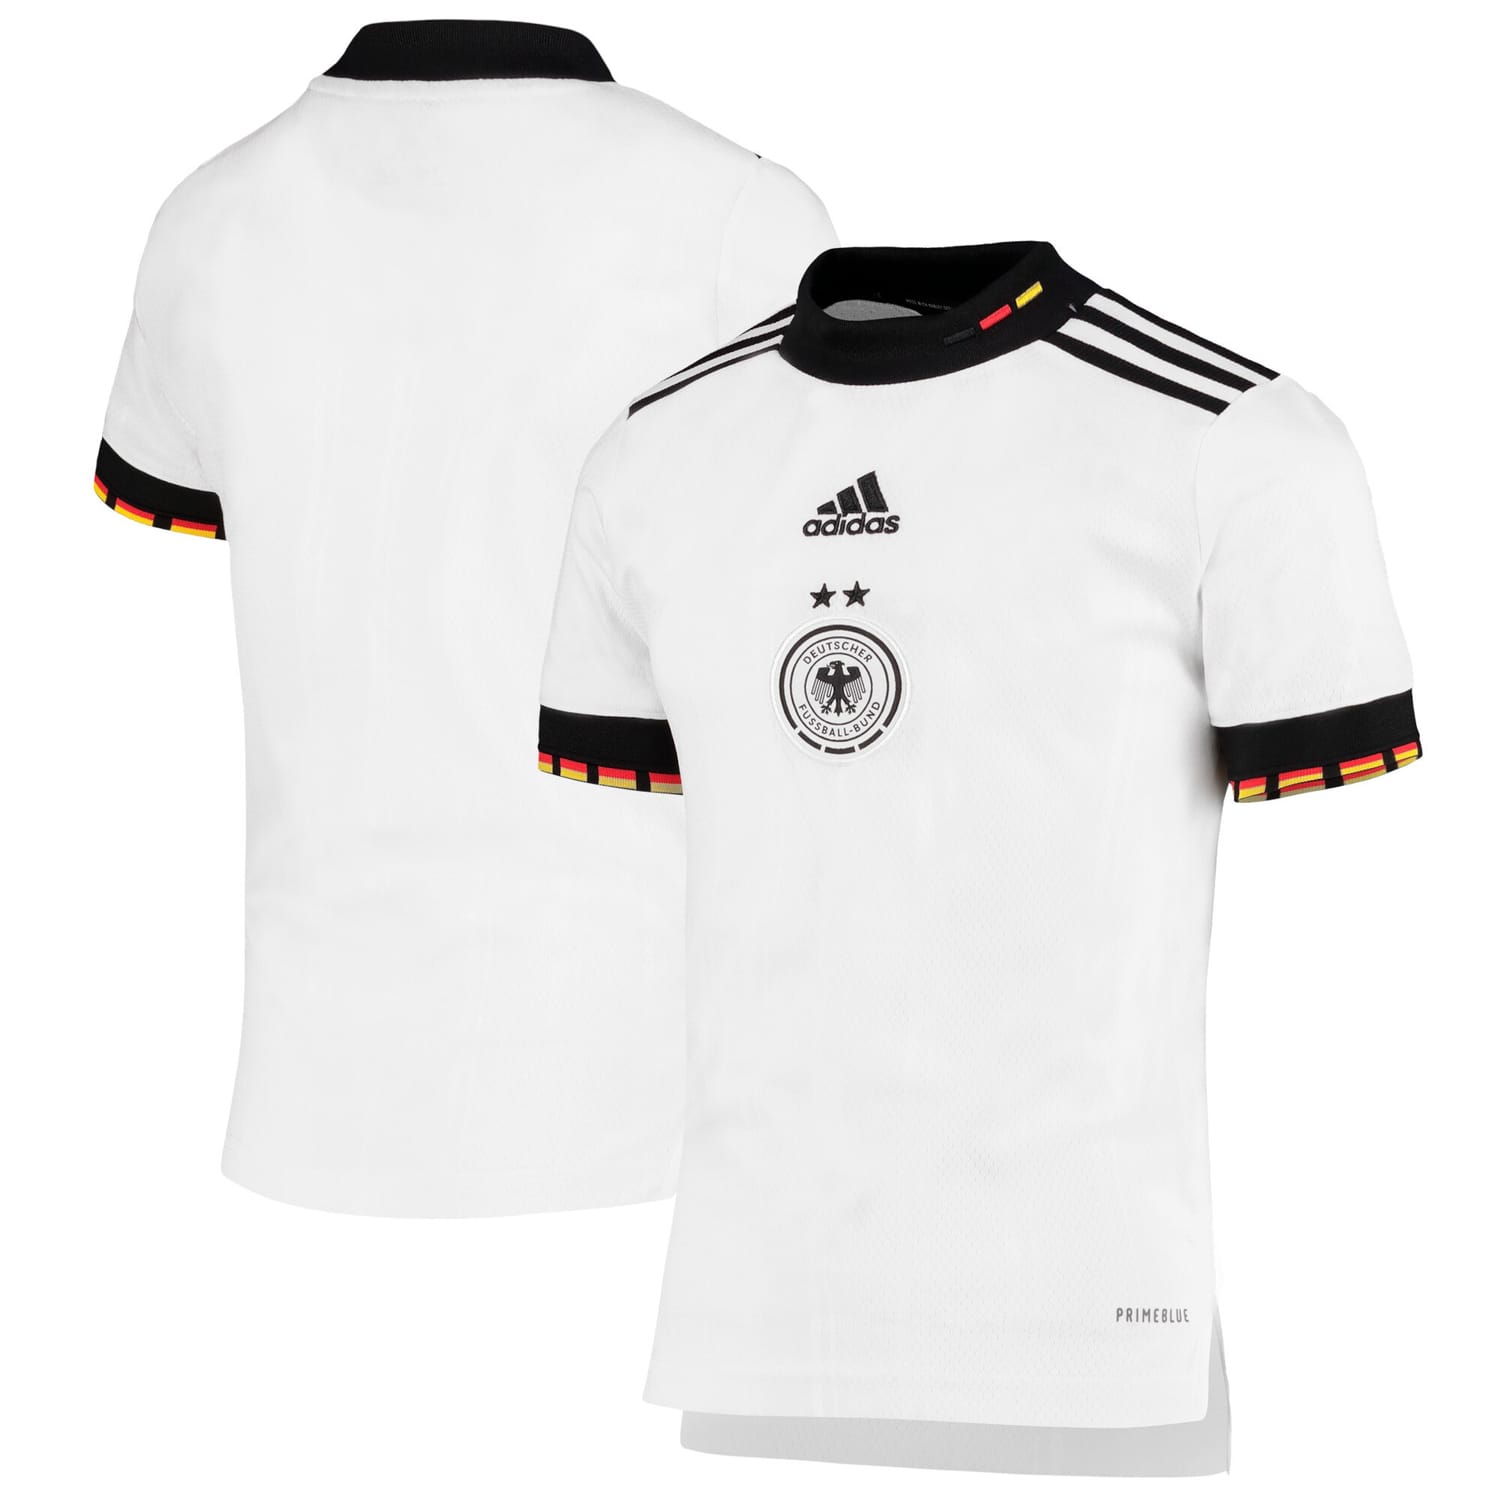 Germany National Team Home Jersey Shirt 2022 for Men